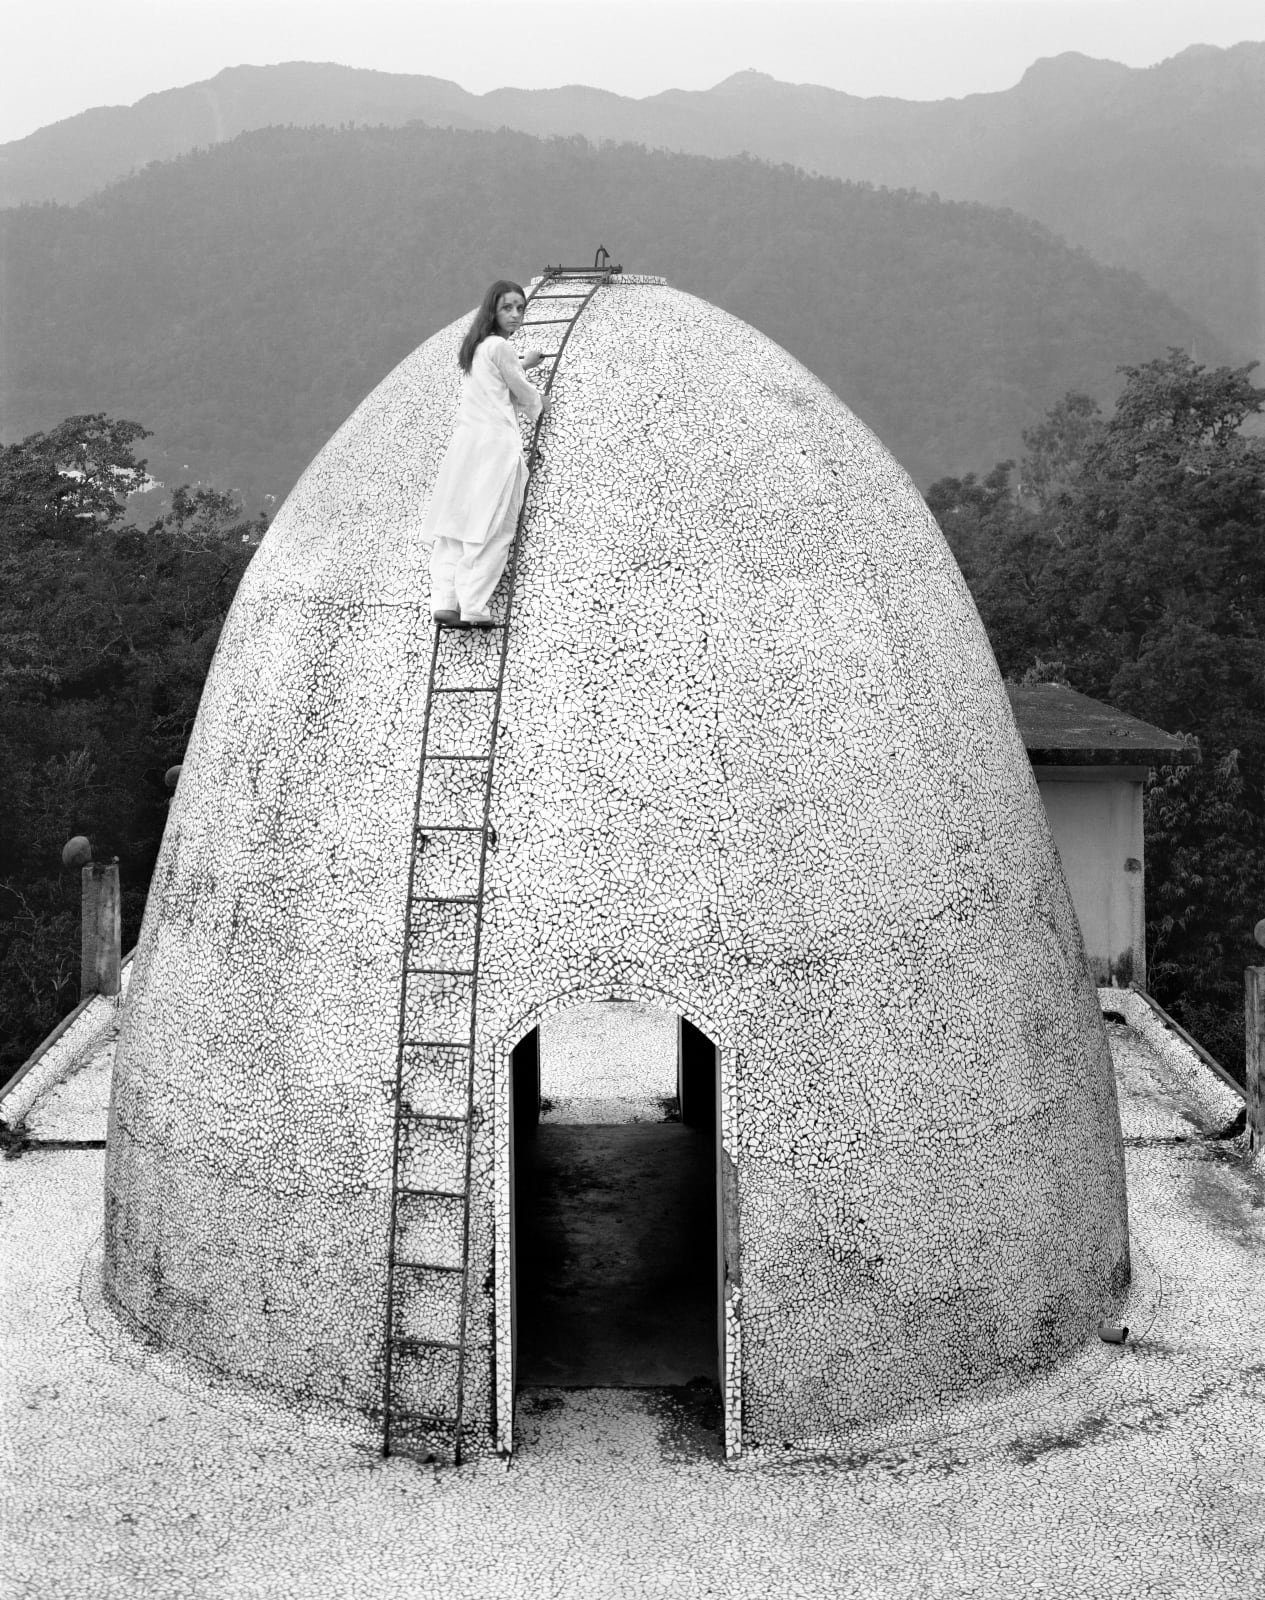 Danielle Nelson Mourning Dome (Rishikesh, India) 2009 Archival Ink Print 59 x 75 in, 2 of 3 $9,500